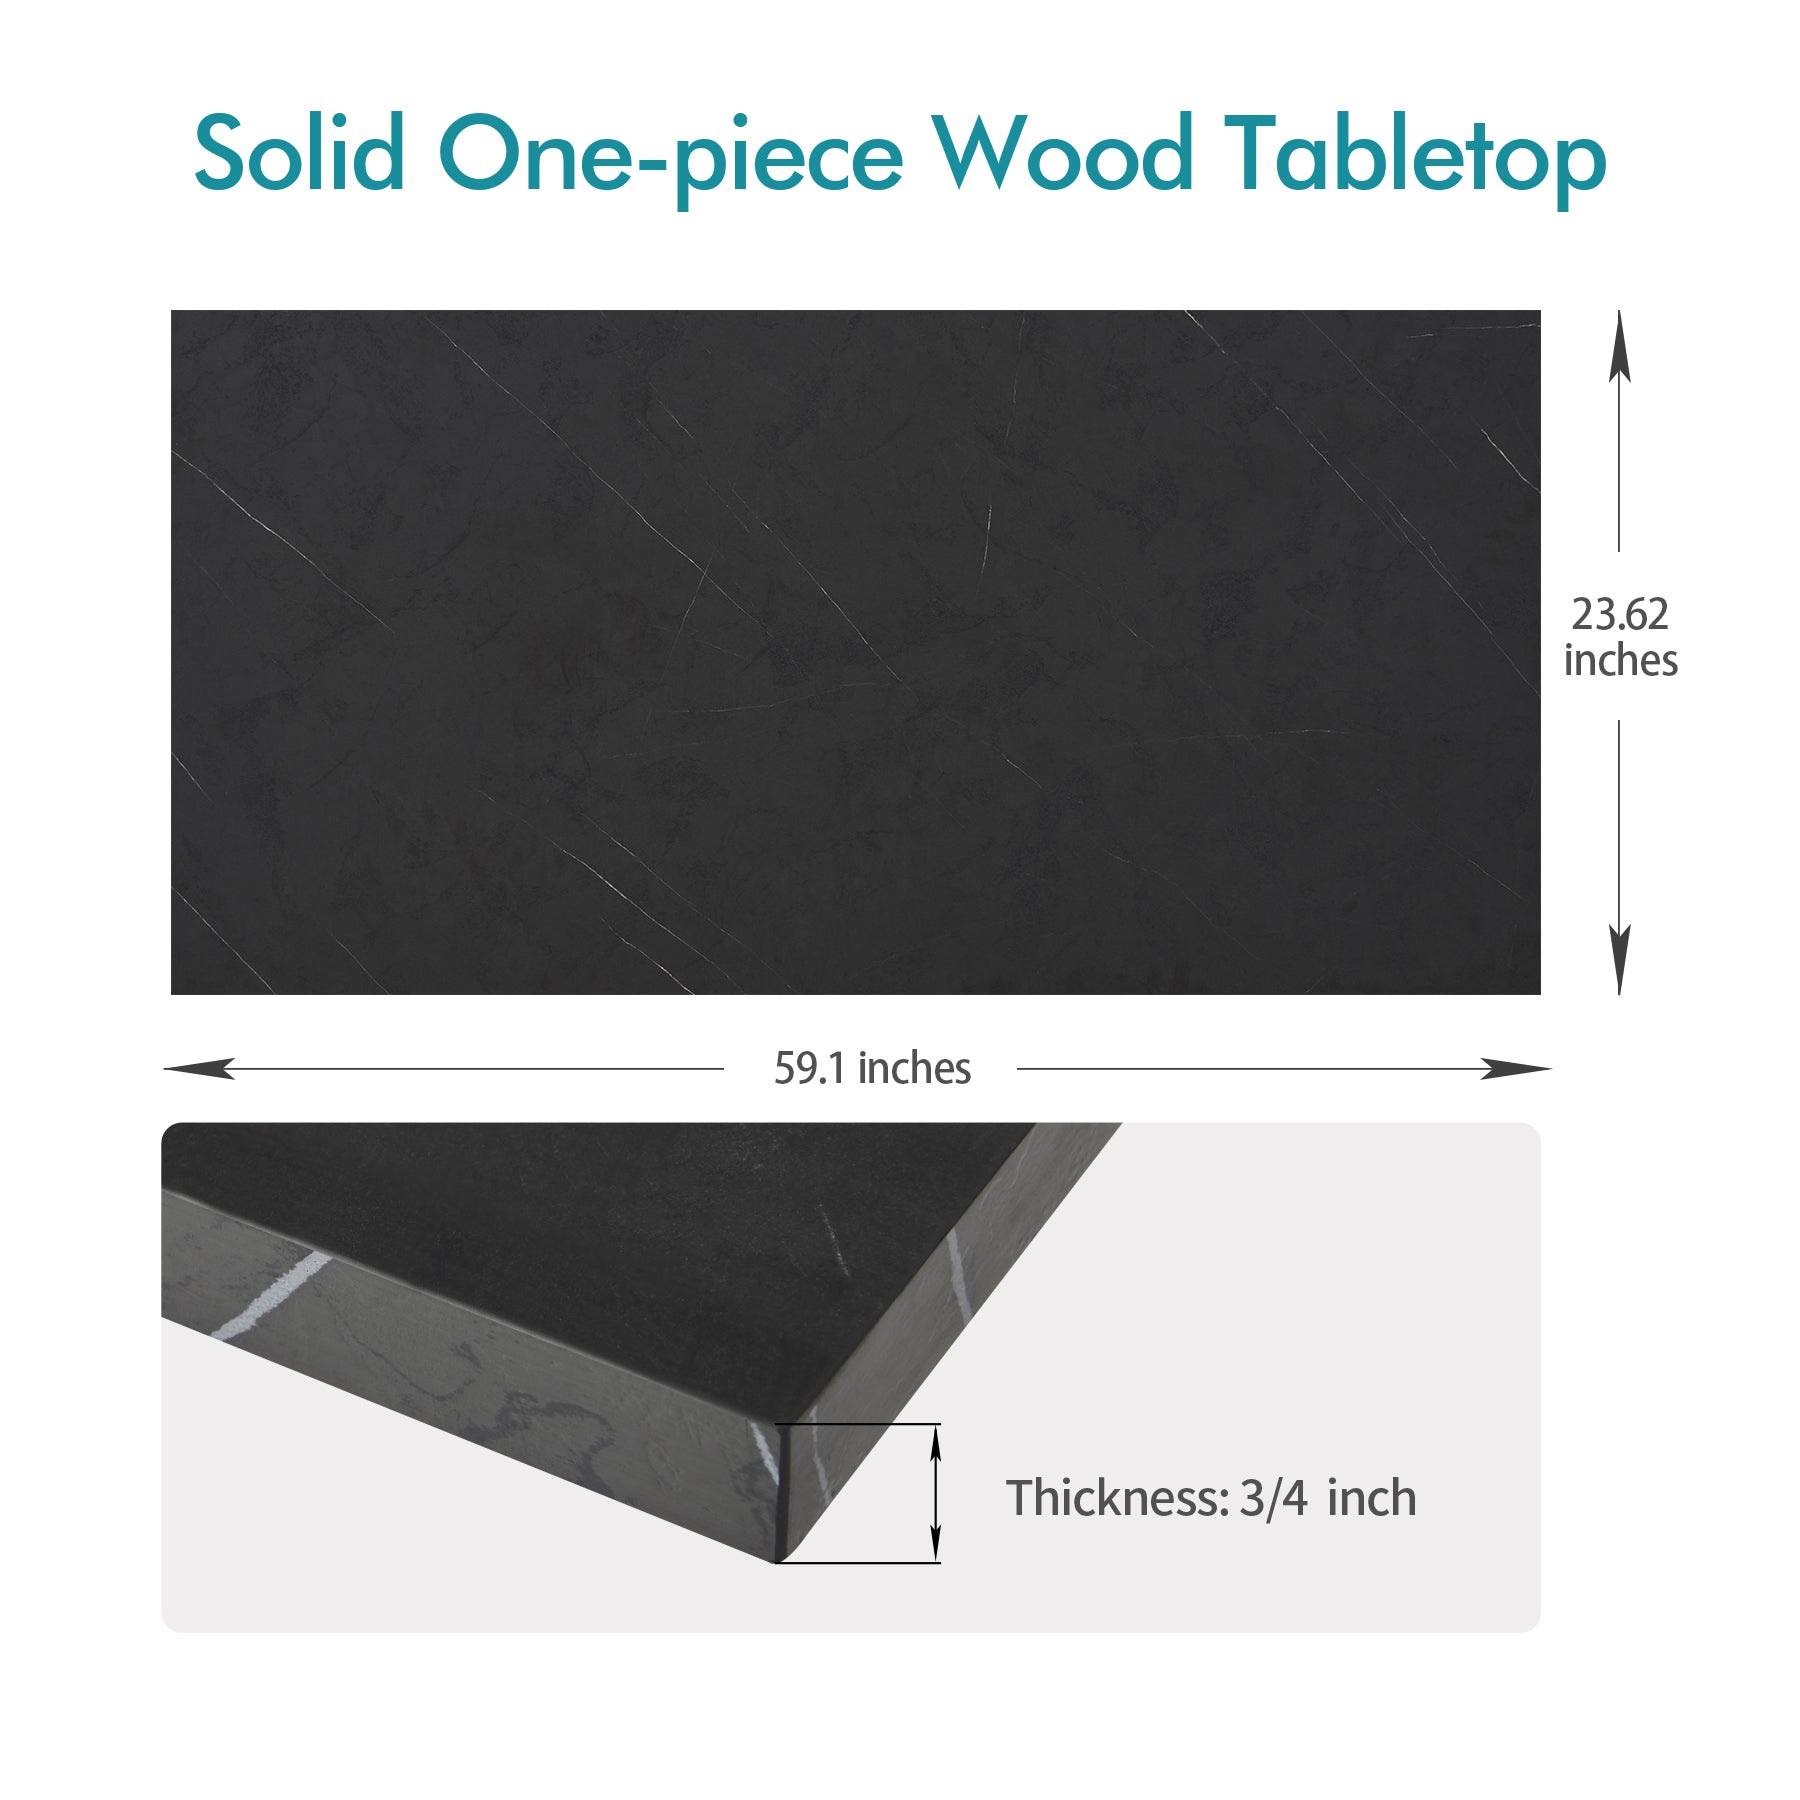 60x24 one-piece wood table top in black